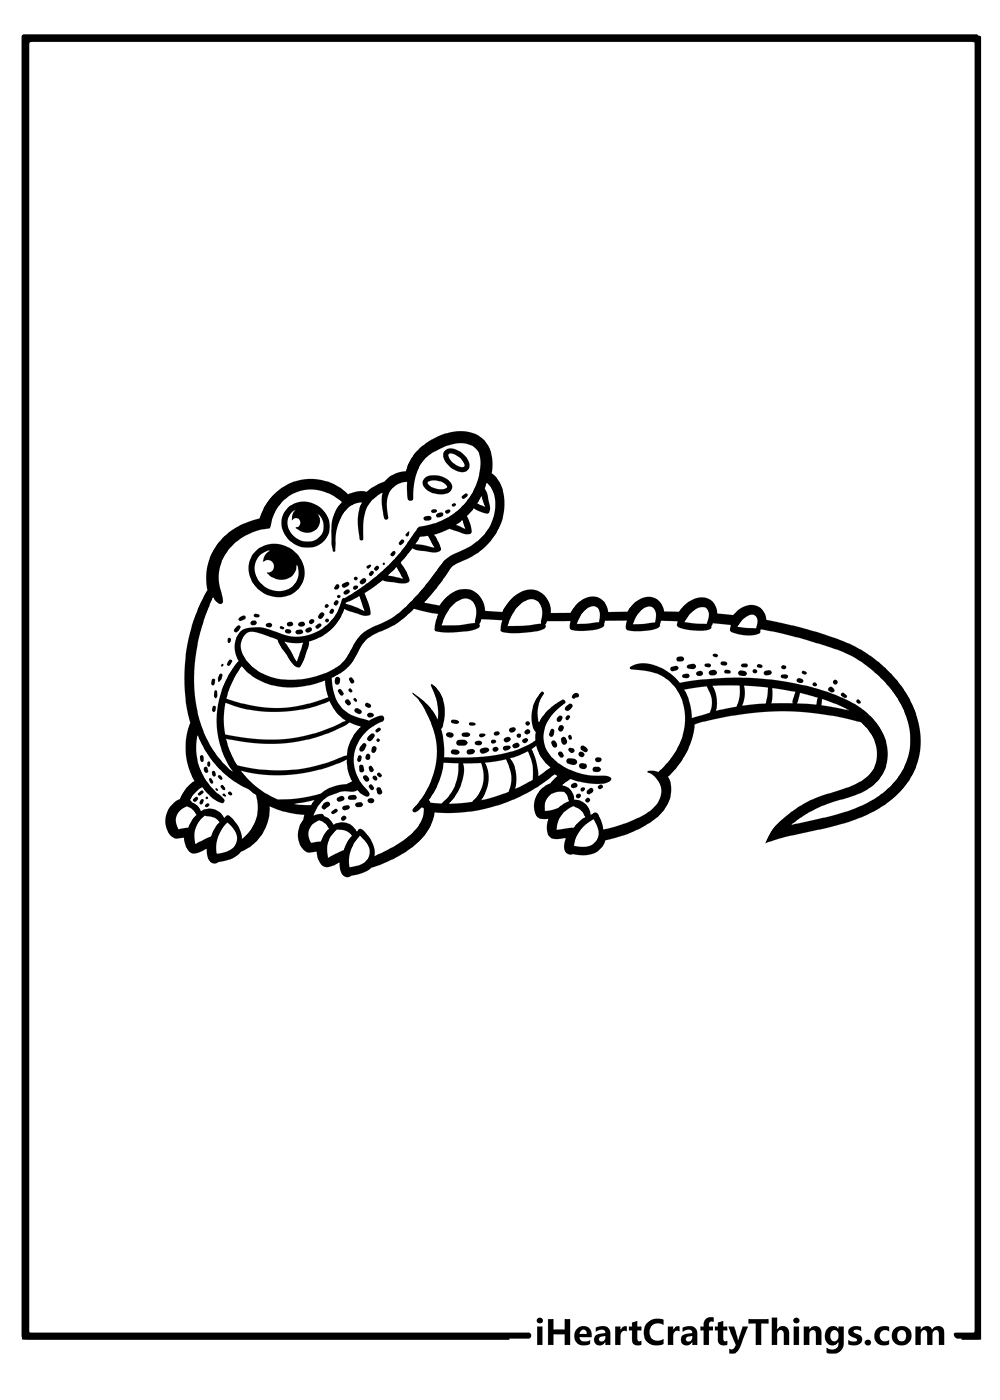 Crocodile Coloring Book for adults free download